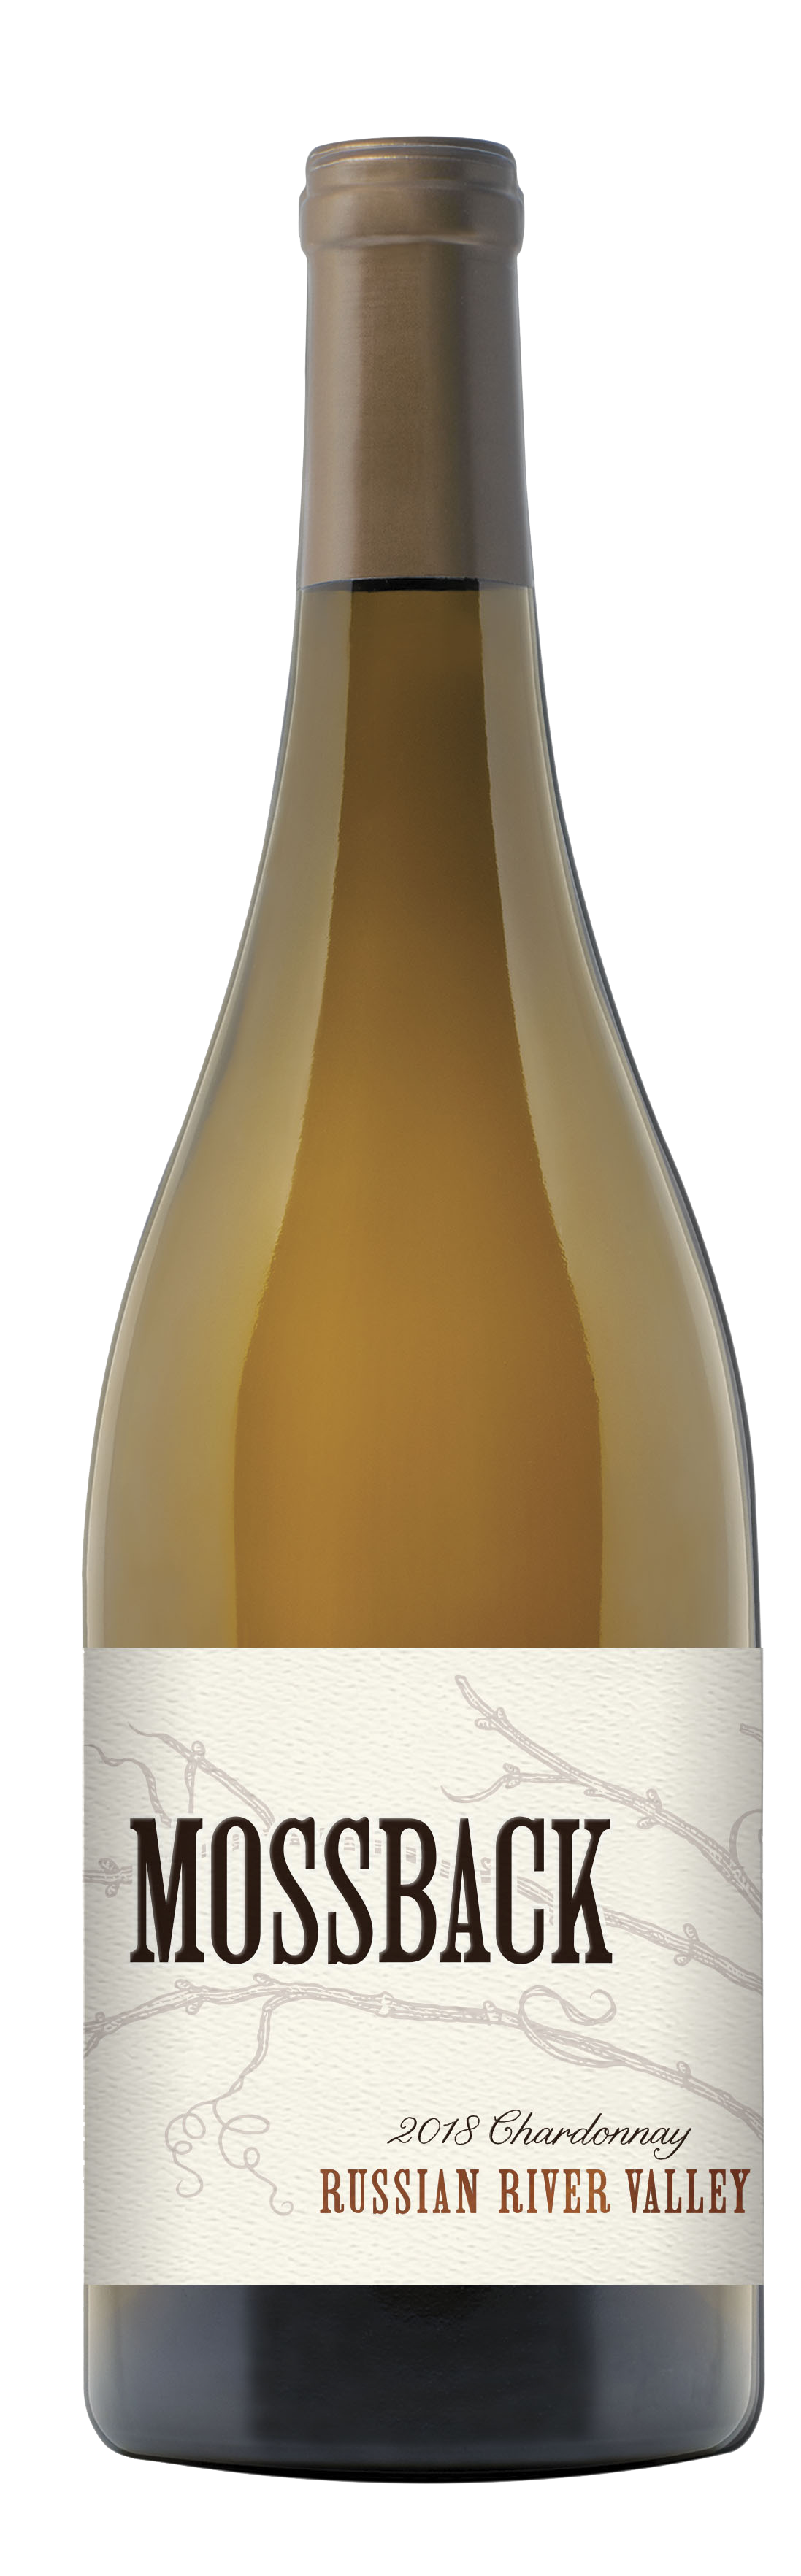 Product Image for 2020 Mossback Russian River Valley Chardonnay